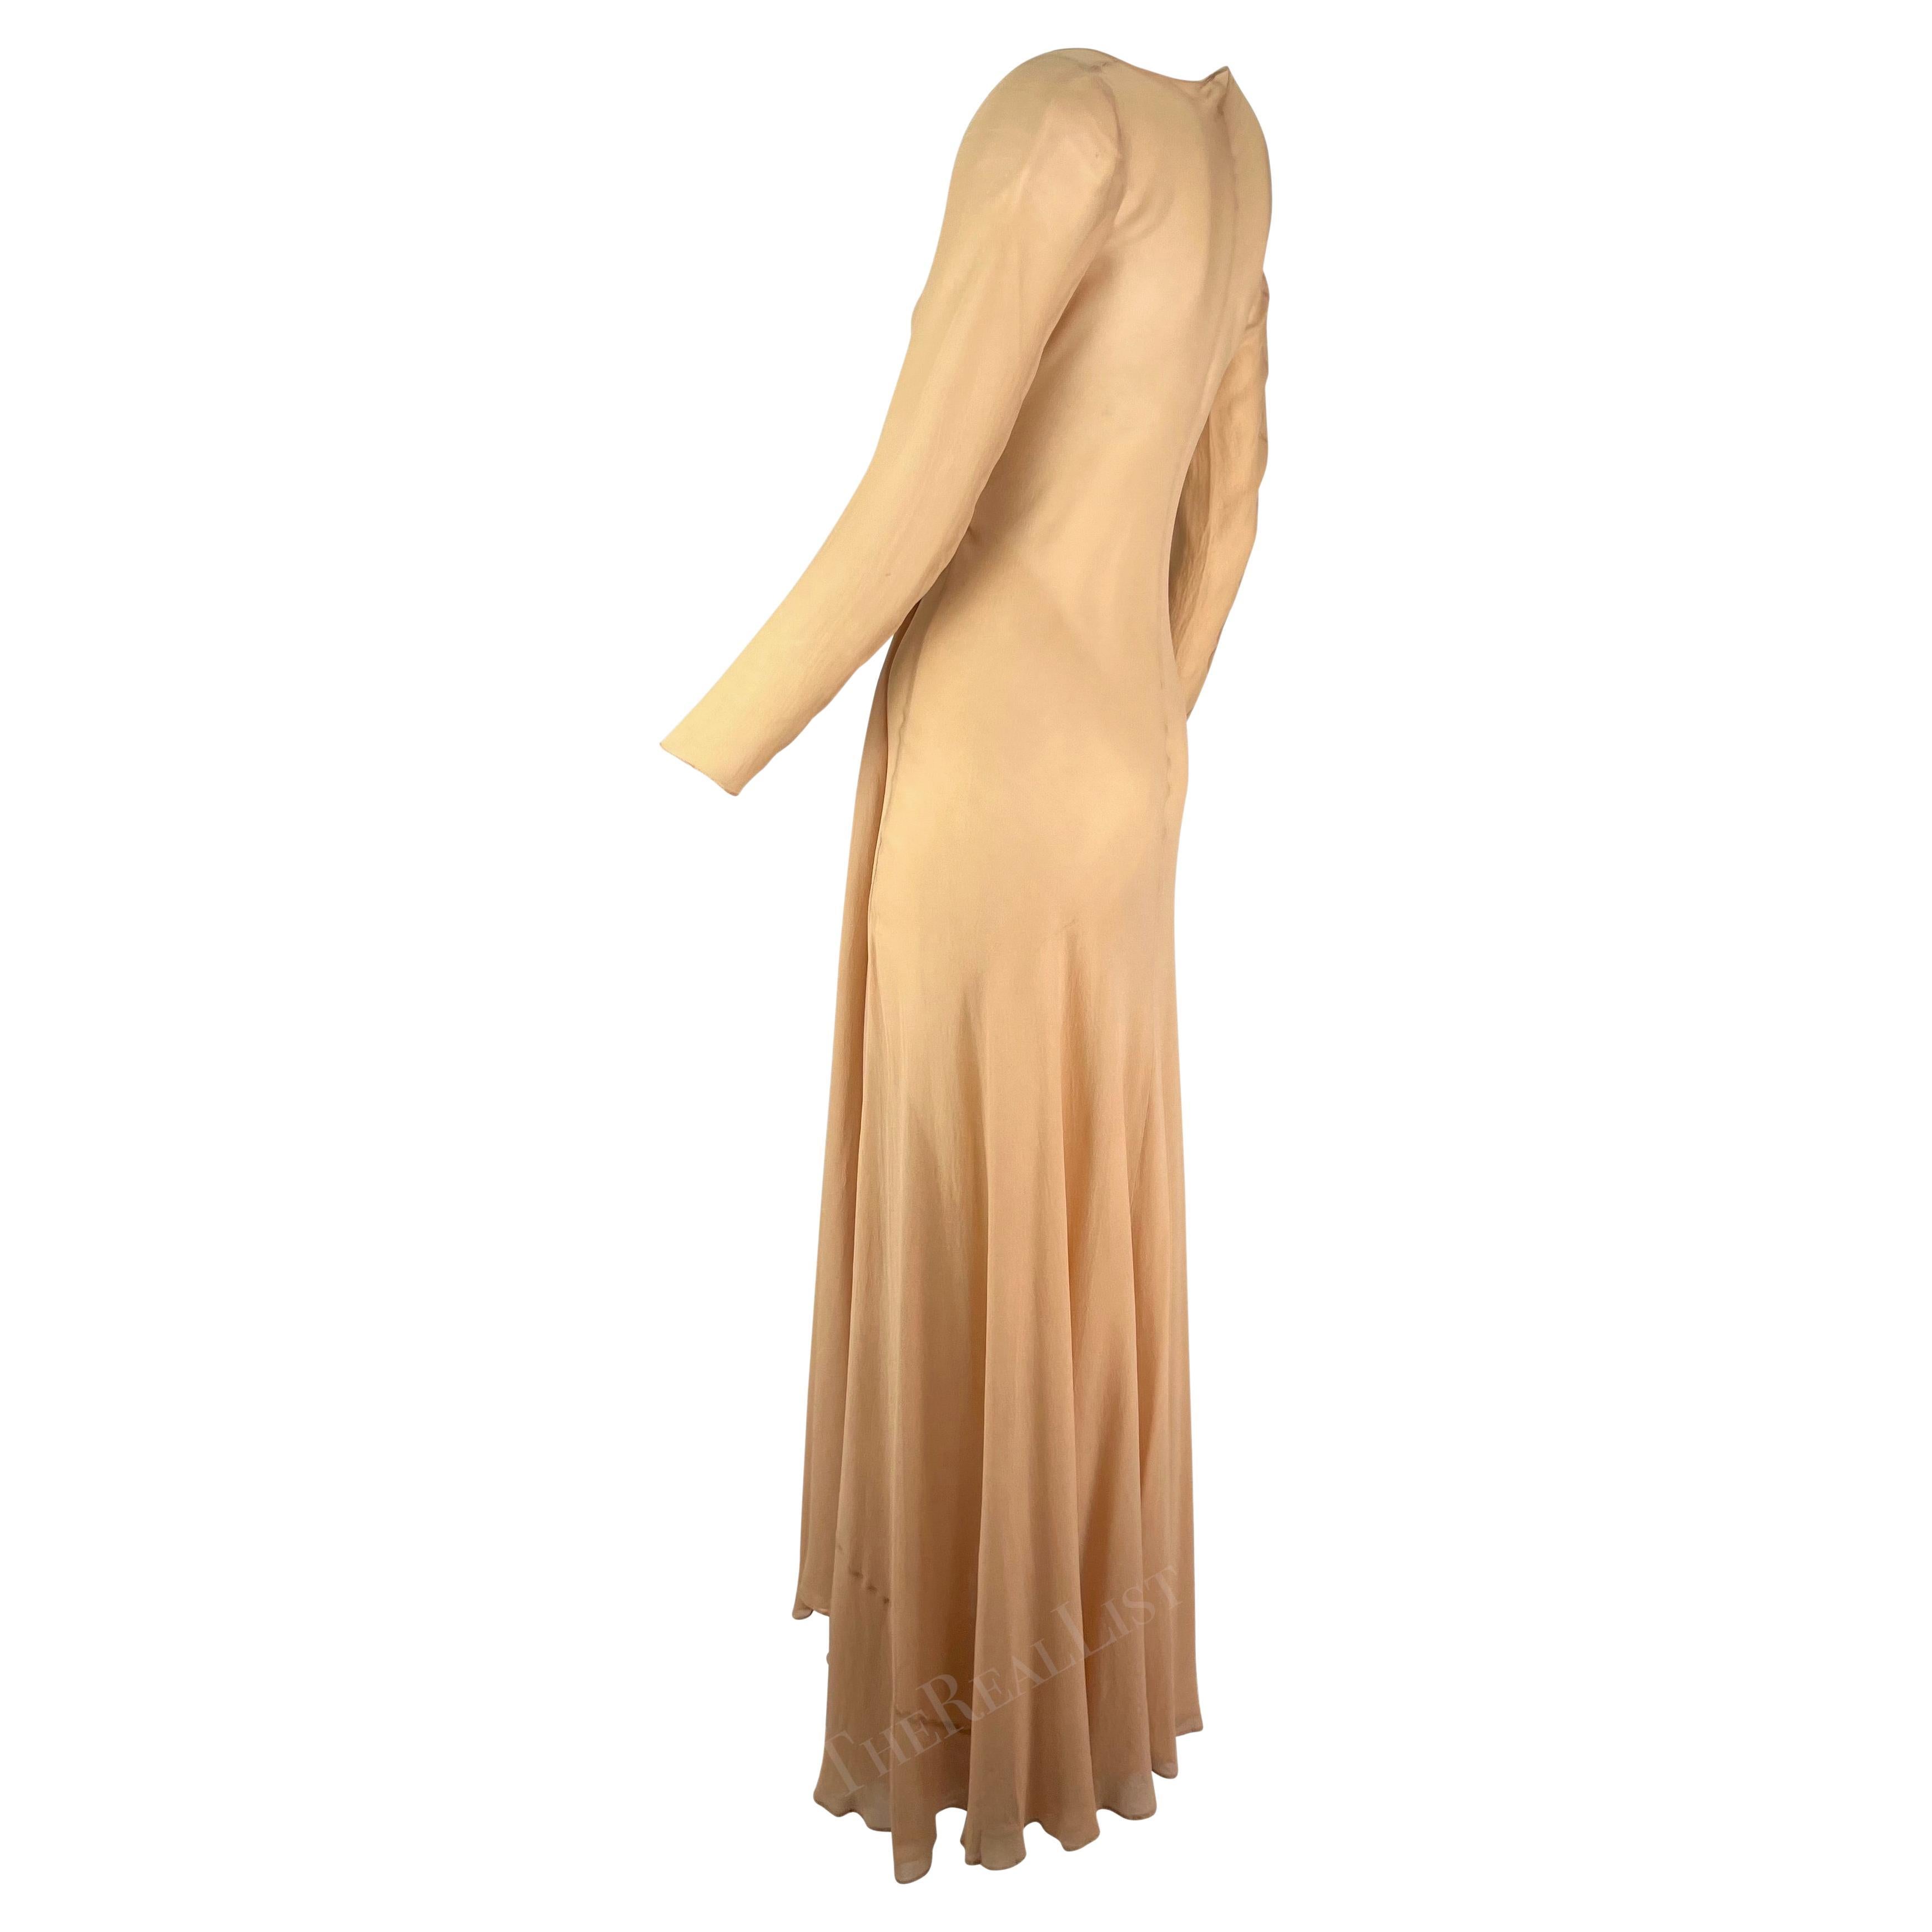 Women's S/S 1998 Gucci by Tom Ford Beige Sheer Wrap Floor Length Sample Gown  For Sale